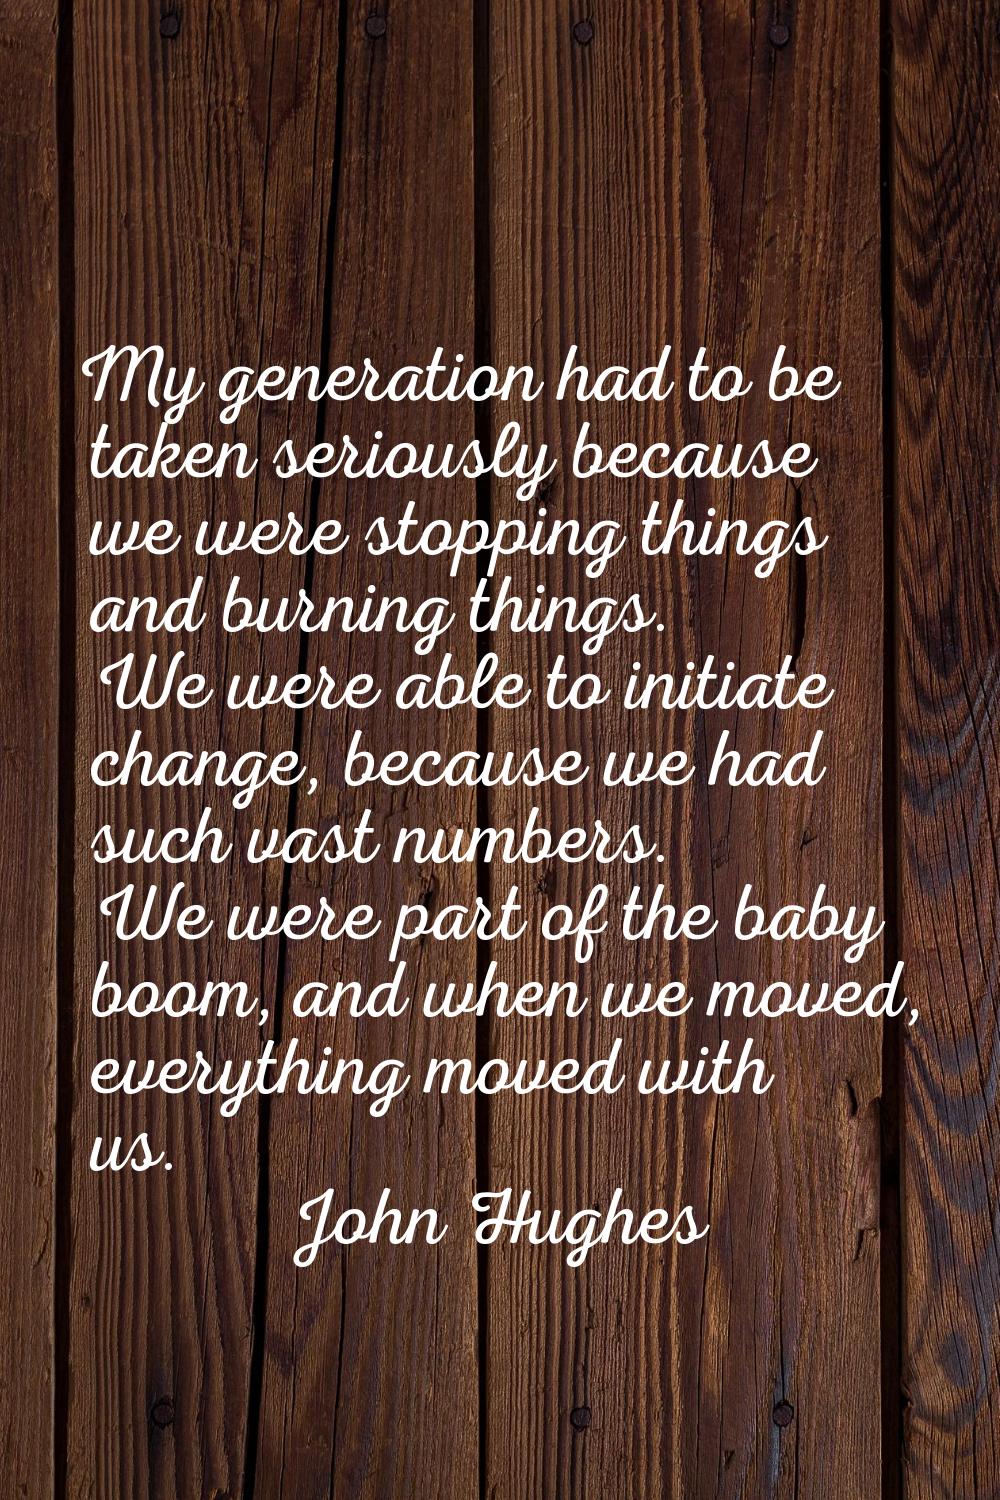 My generation had to be taken seriously because we were stopping things and burning things. We were